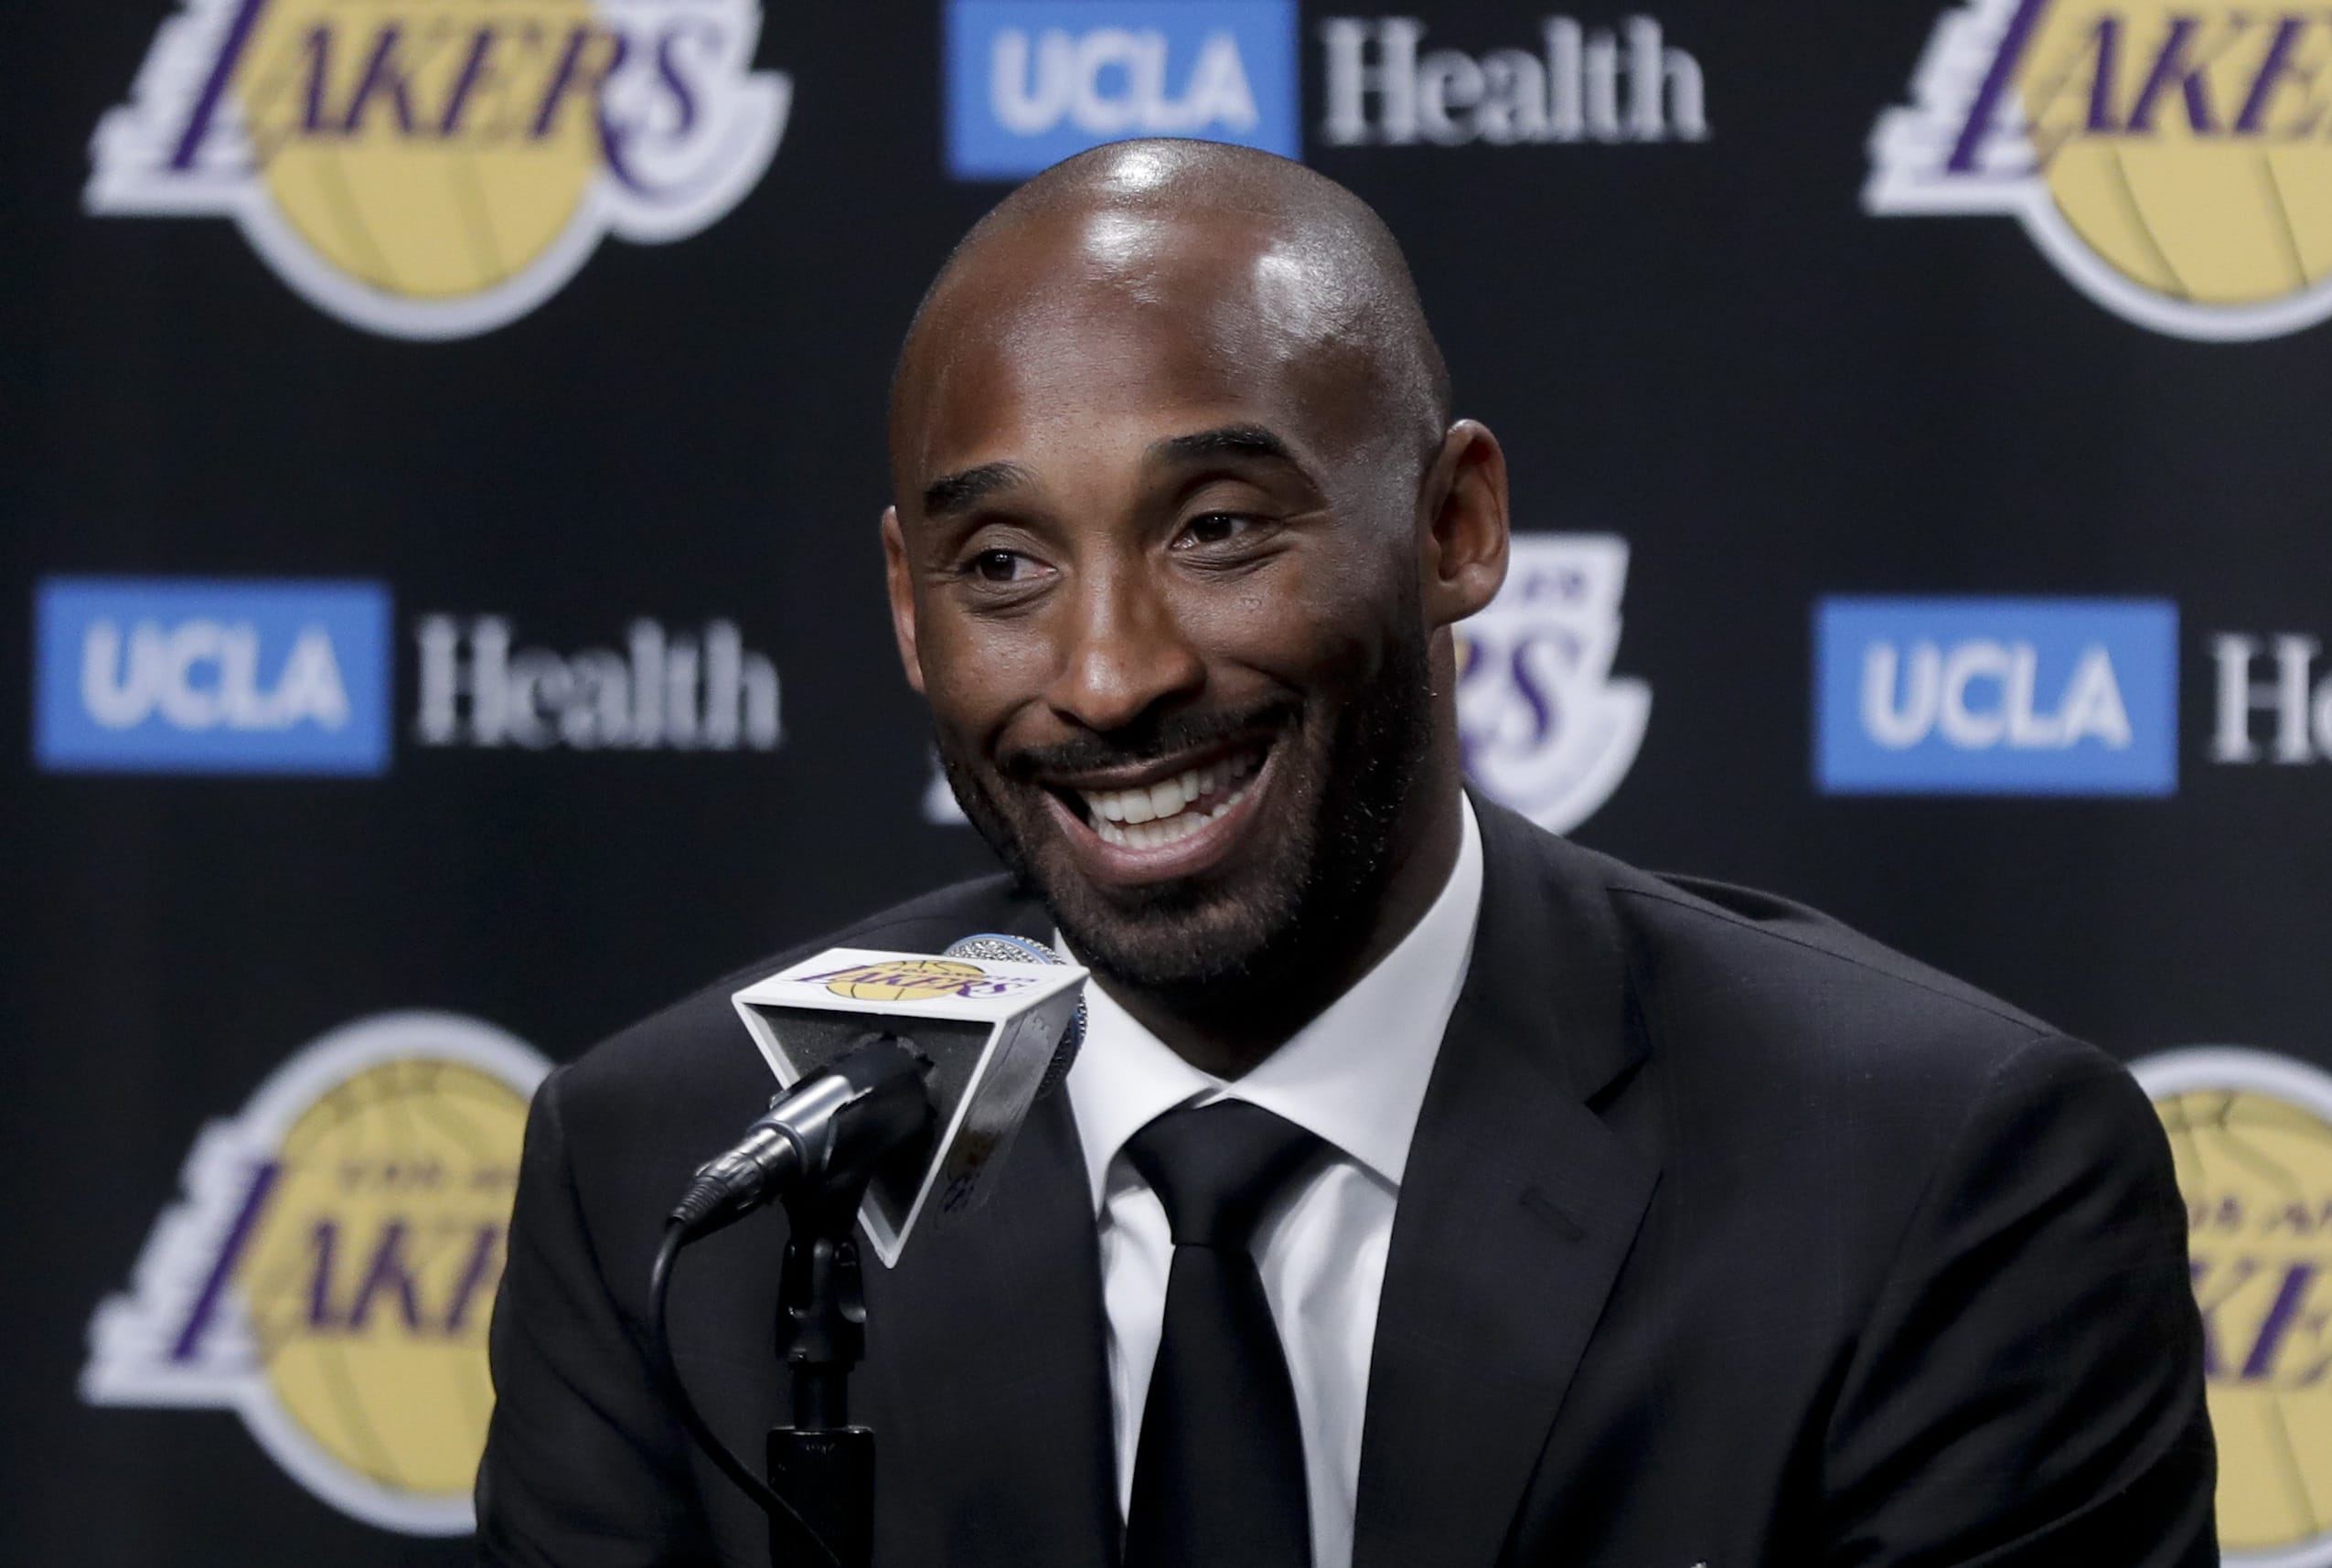 Former Los Angeles Laker Kobe Bryant and fellow NBA greats Tim Duncan and Kevin Garnett headlined a nine-person group announced Saturday, April 4, 2020, as this year’s class of enshrinees into the Naismith Memorial Basketball Hall of Fame.